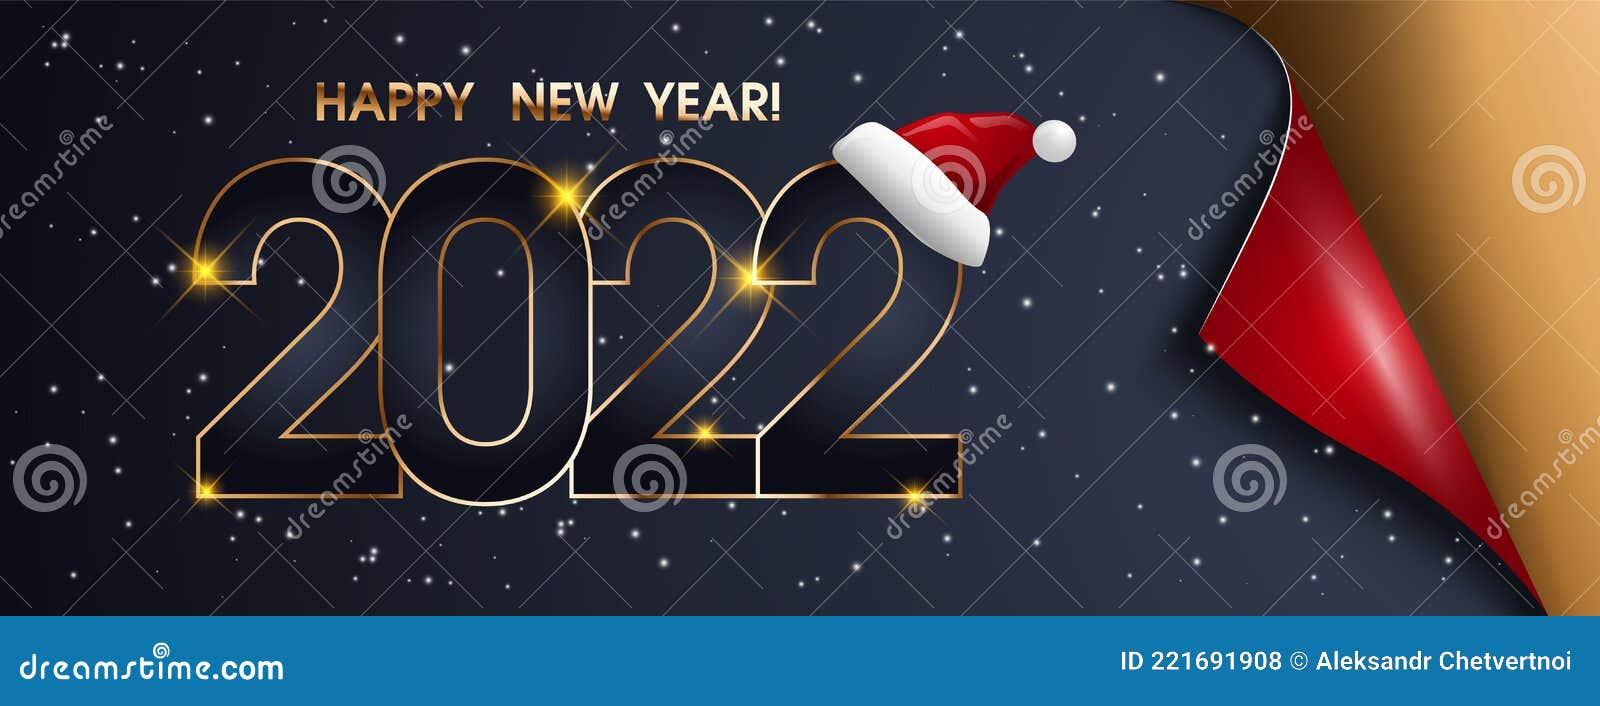 2022 Happy New Year Background Design. Greeting Card, Banner, Poster.  Vector Illustration. Festive Rich Design for Stock Vector - Illustration of  2022, banner: 221691908